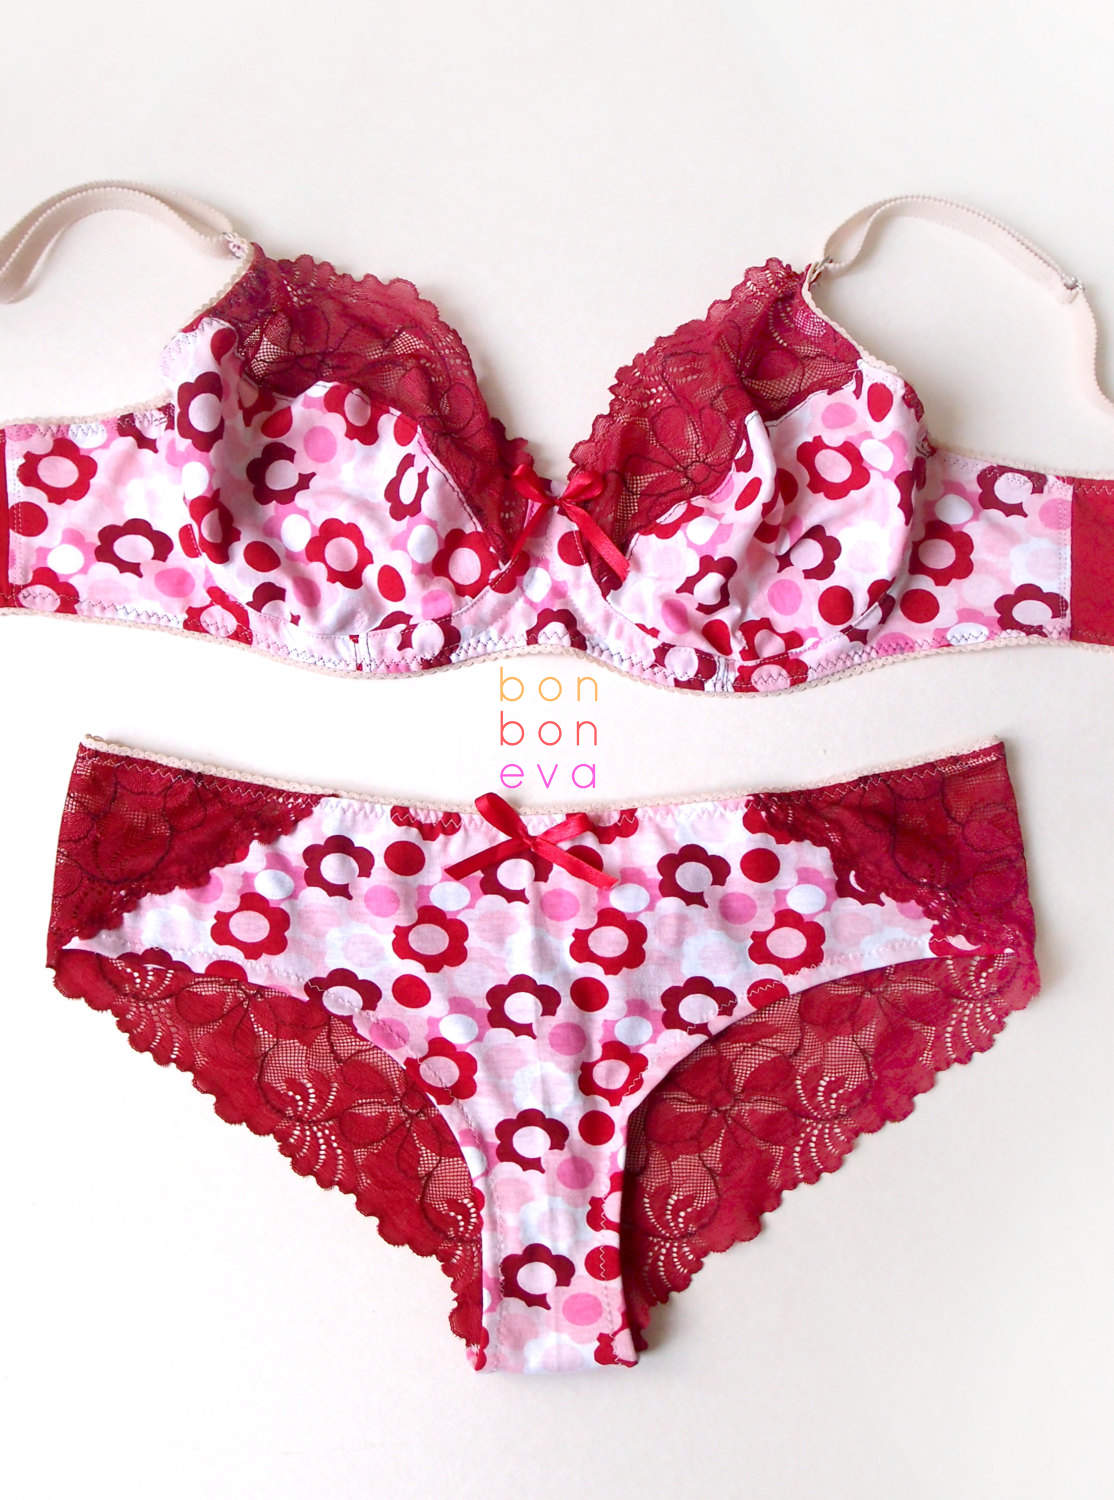 Flower Power on a Lingerie Set - for the Love of Flowers, Colours and Lace!